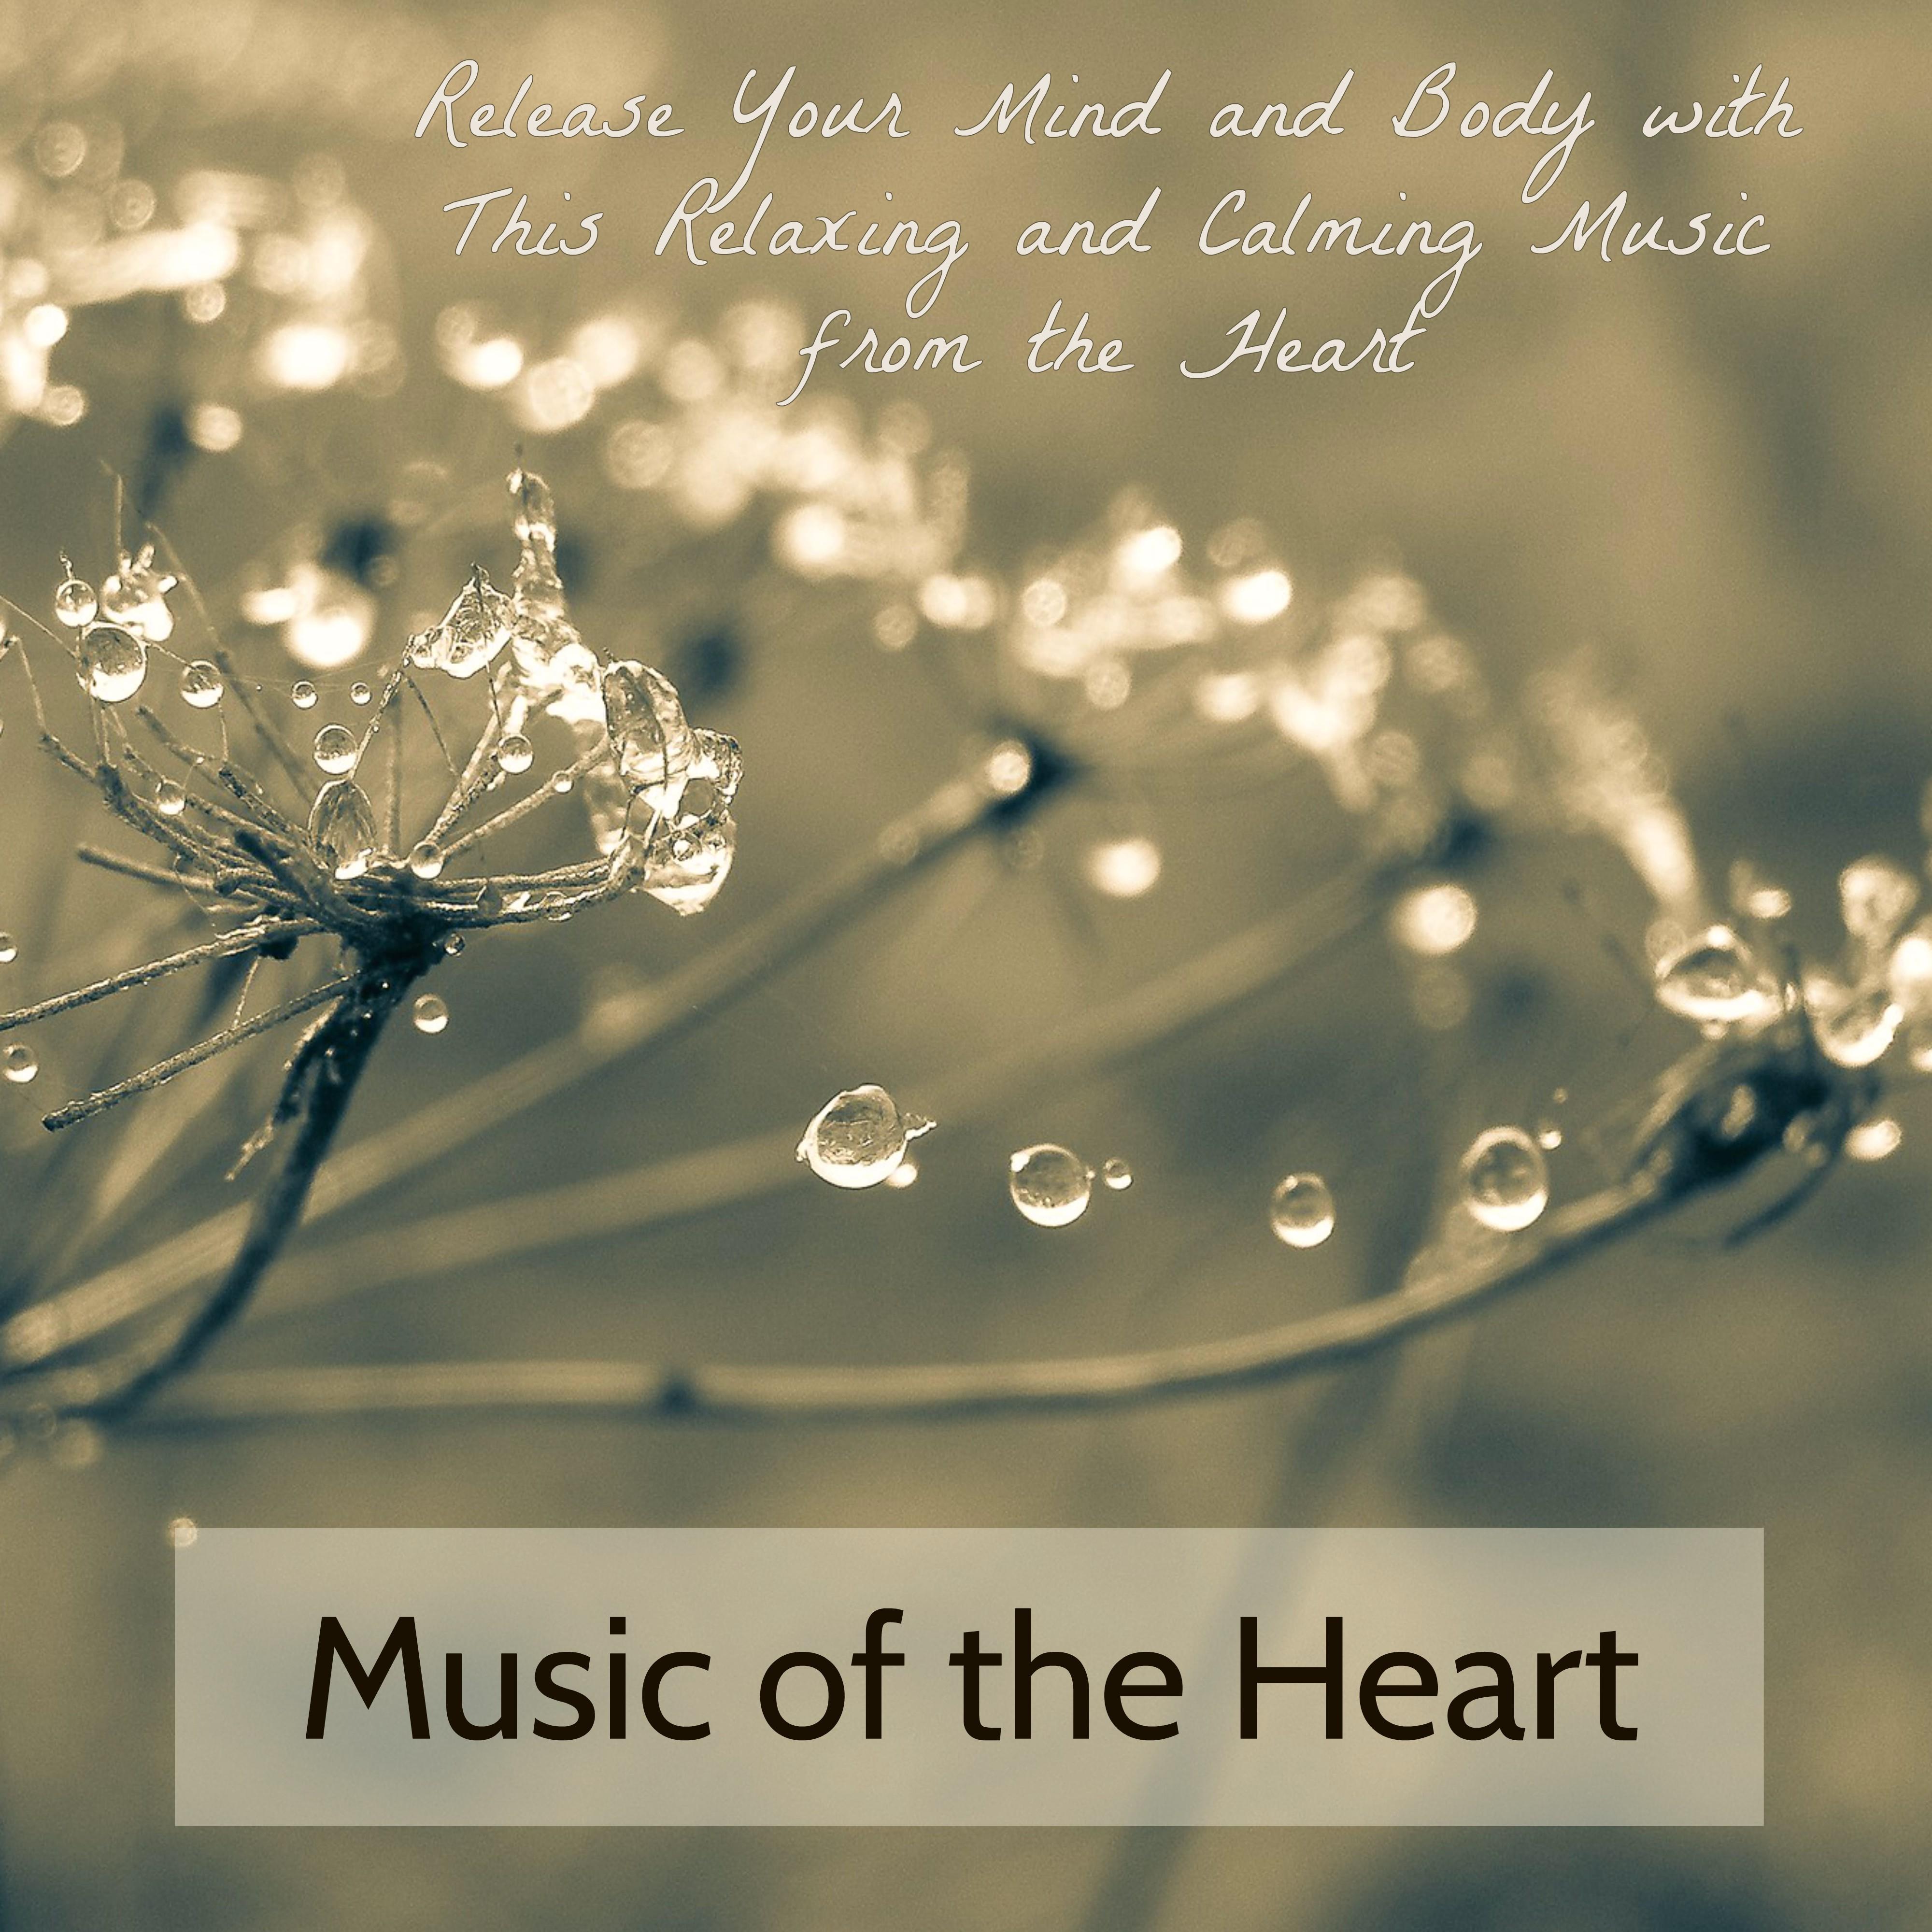 Music of the Heart – Release Your Mind and Body with This Relaxing and Calming Music from the Heart